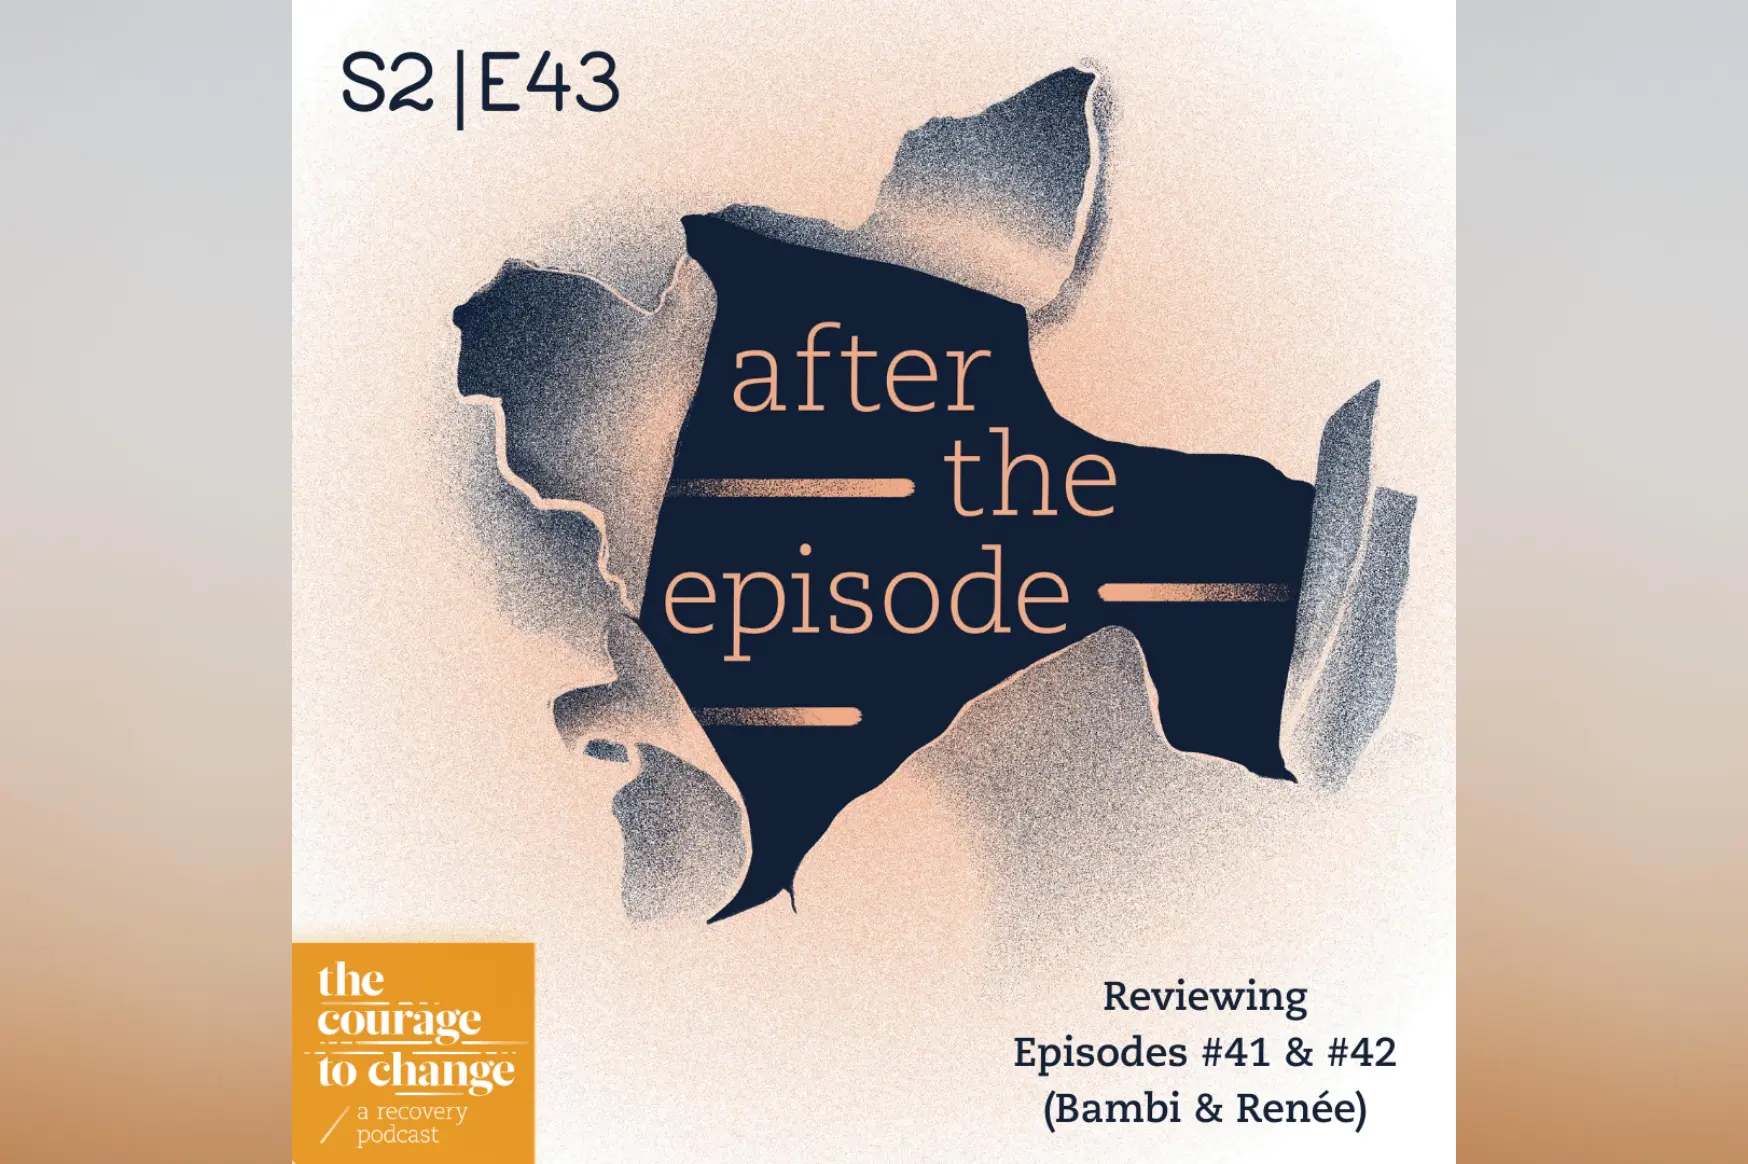 #43 - After the Episode